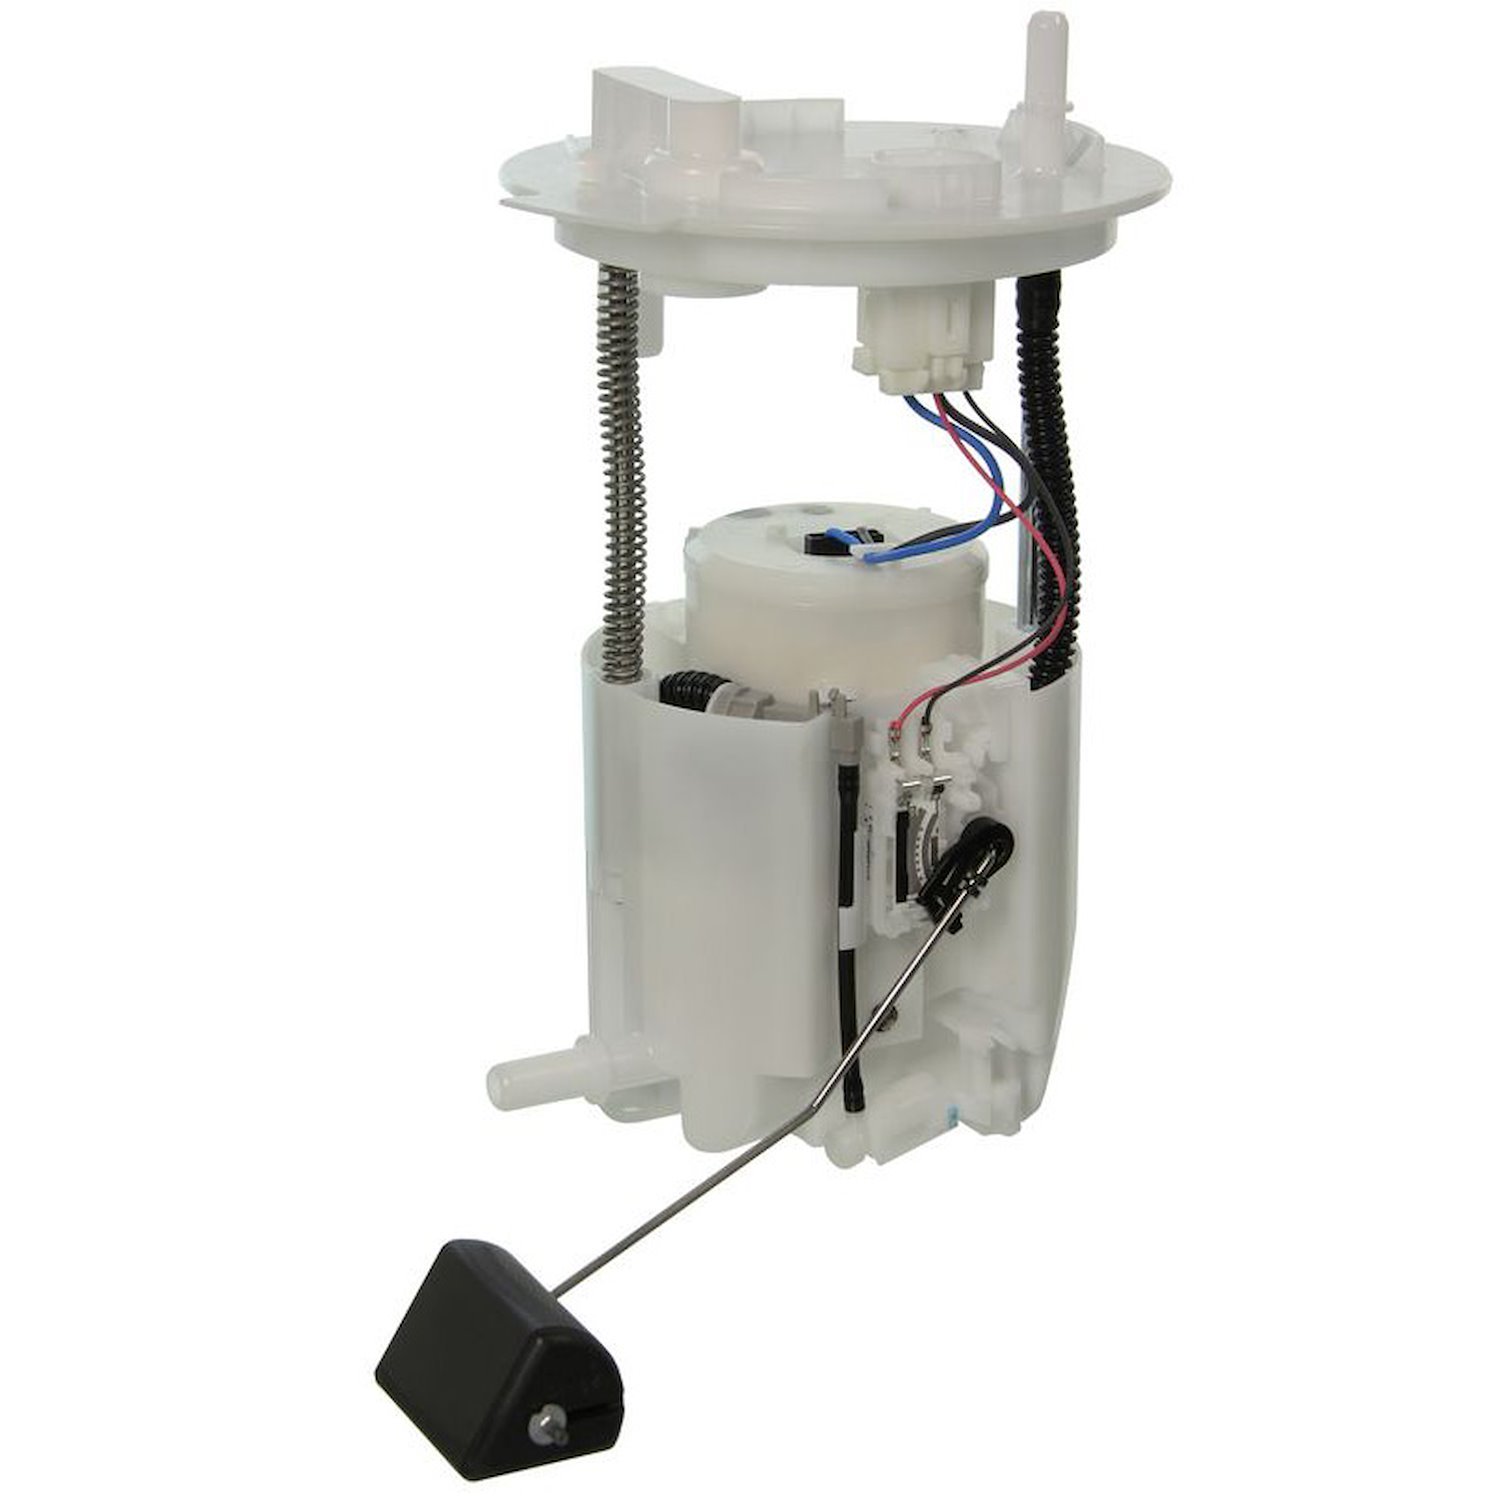 OE Ford/Mercury Replacement Fuel Pump Module Assembly for 2010-2011 Mercury Milan/2010-2012 Ford Fusion